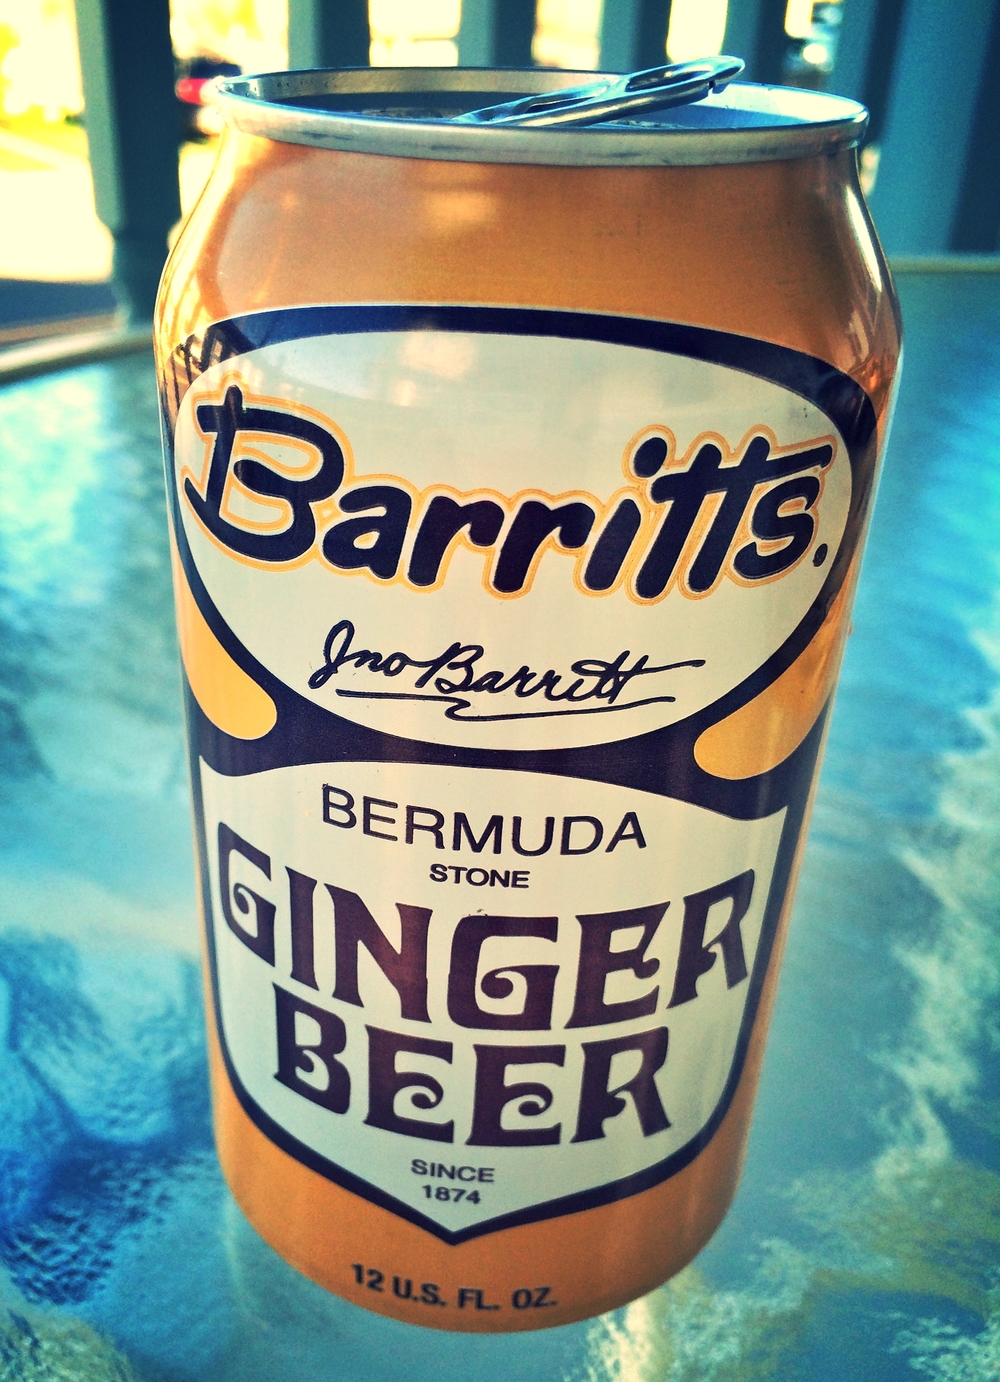  Ginger Beer is nonalcoholic and is available at larger grocery stores and beer distributors. 